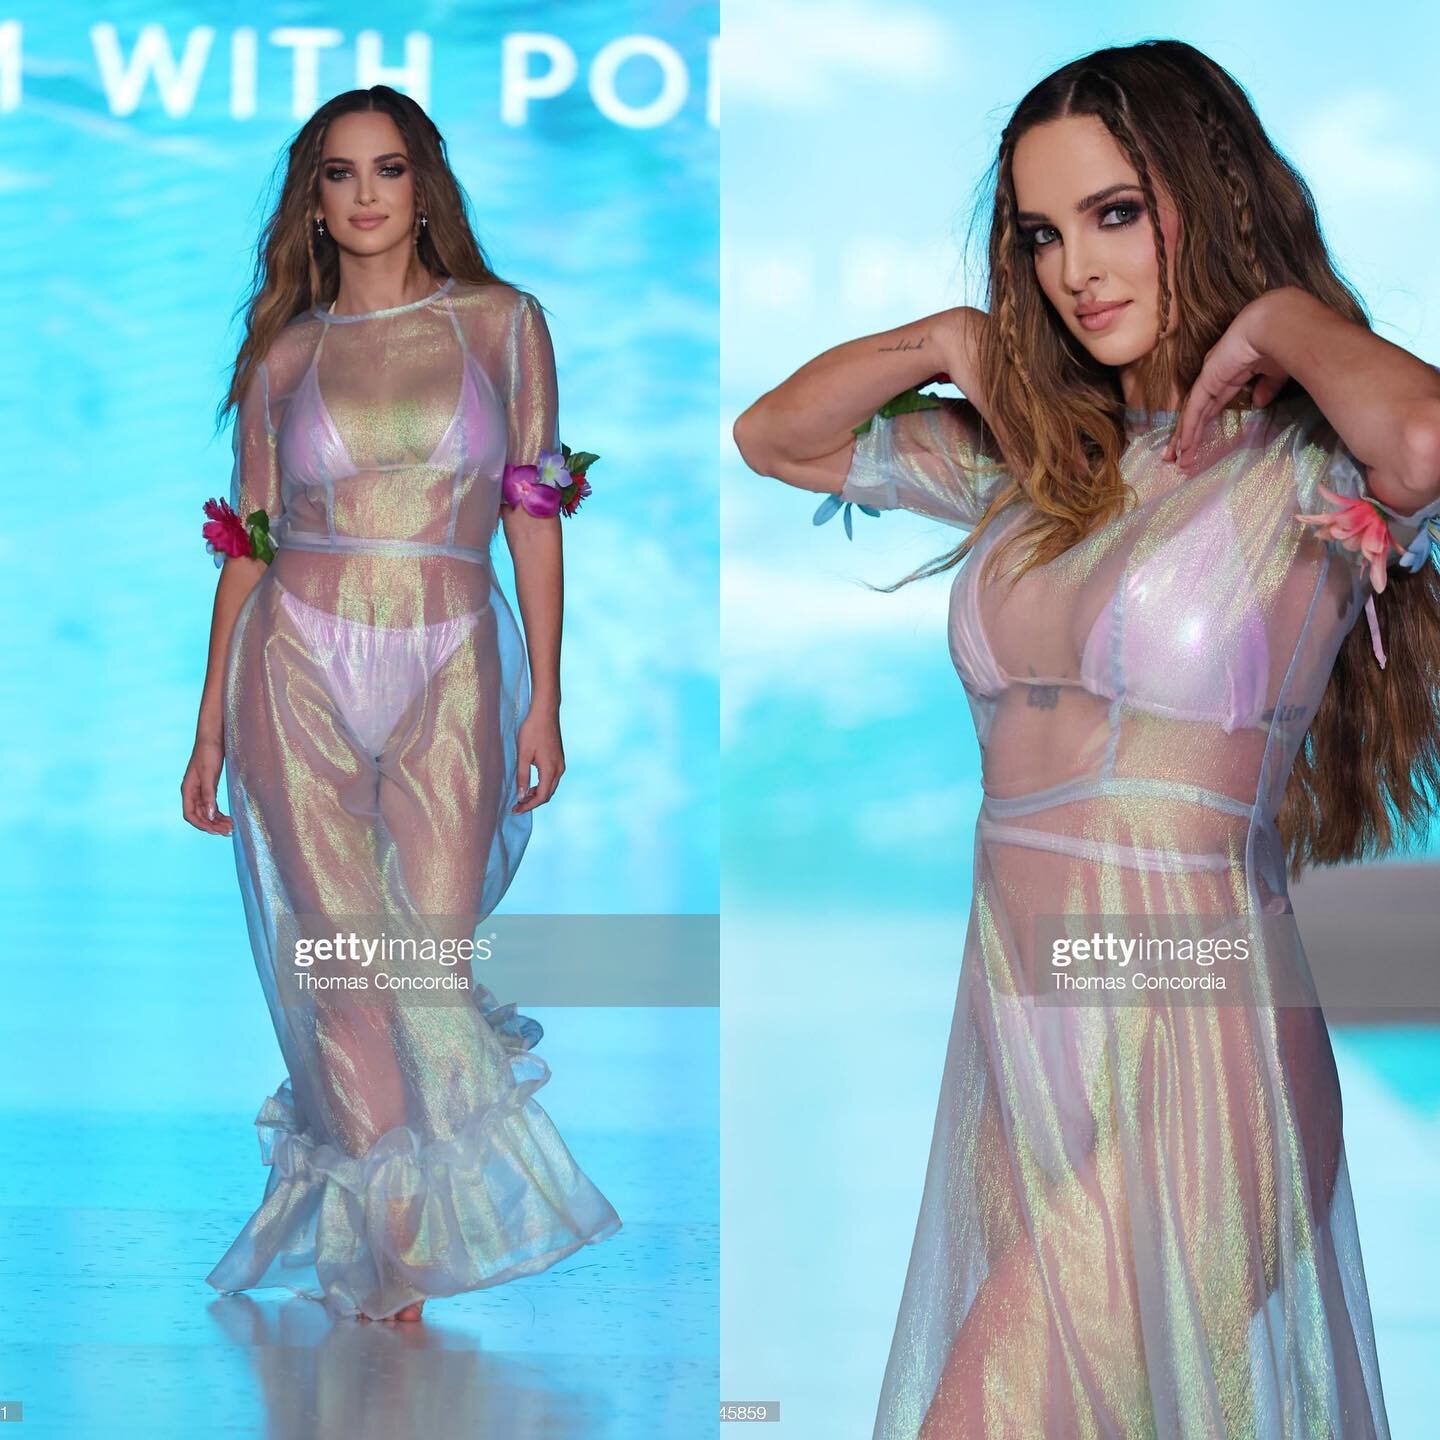 Felt like an absolute princess. @miamiswimweekshows🤍

Designer: @swimwithpoppies 
Hair: @dafne_evangelista 
Makeup: @glowwithmilan 
Agency: @jl.modelmanagement @nymmg 
Photo by Thomas Concordia @gettyimages